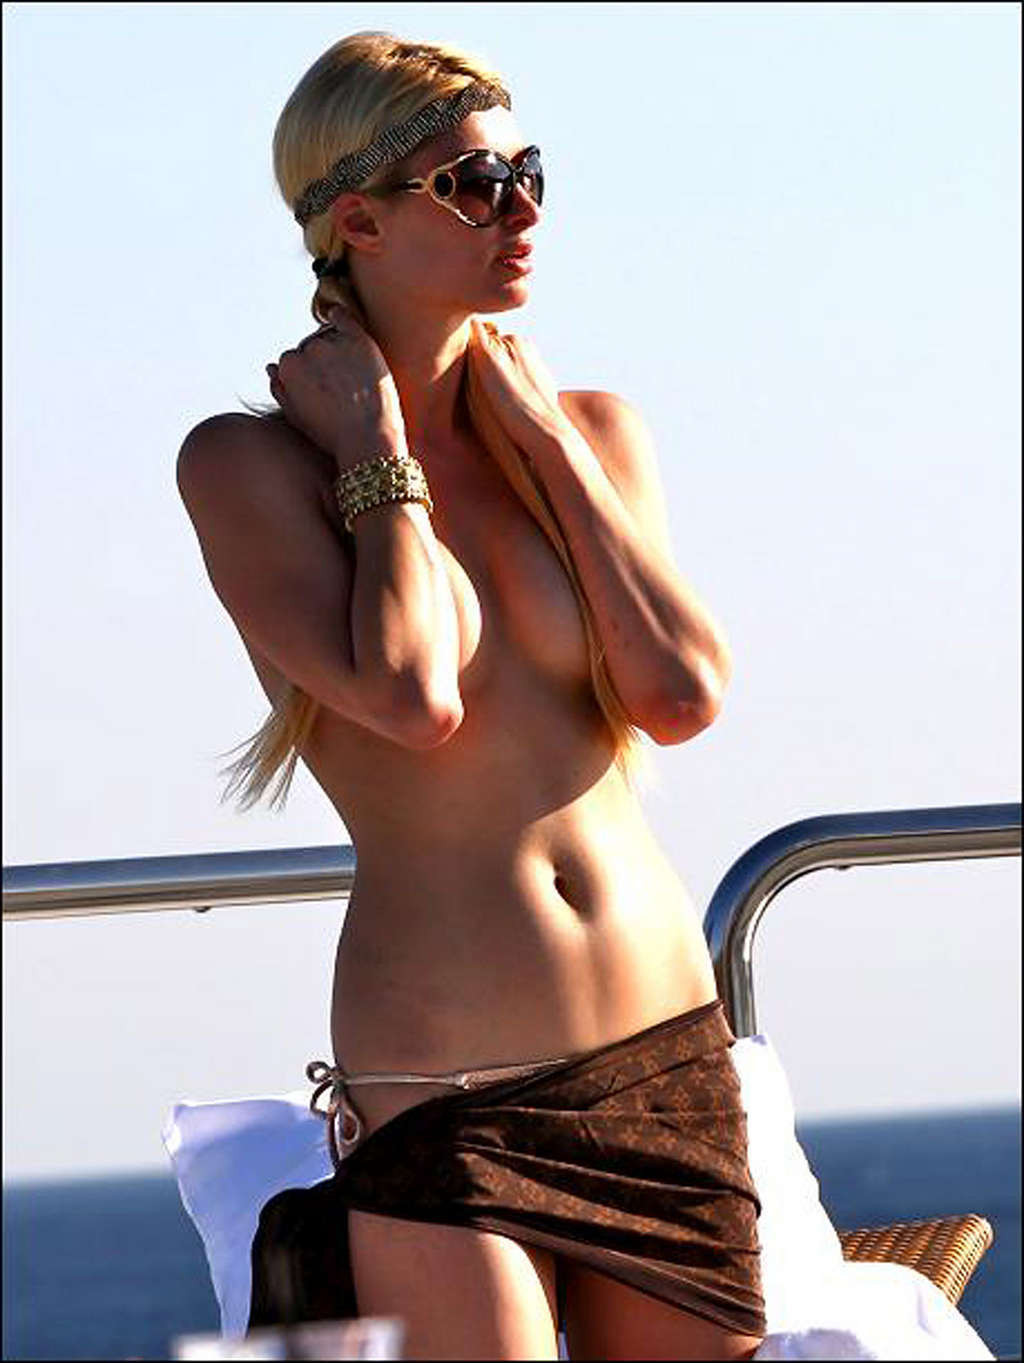 Paris Hilton enjoying on yacht in topless and showing sexy body #75327031